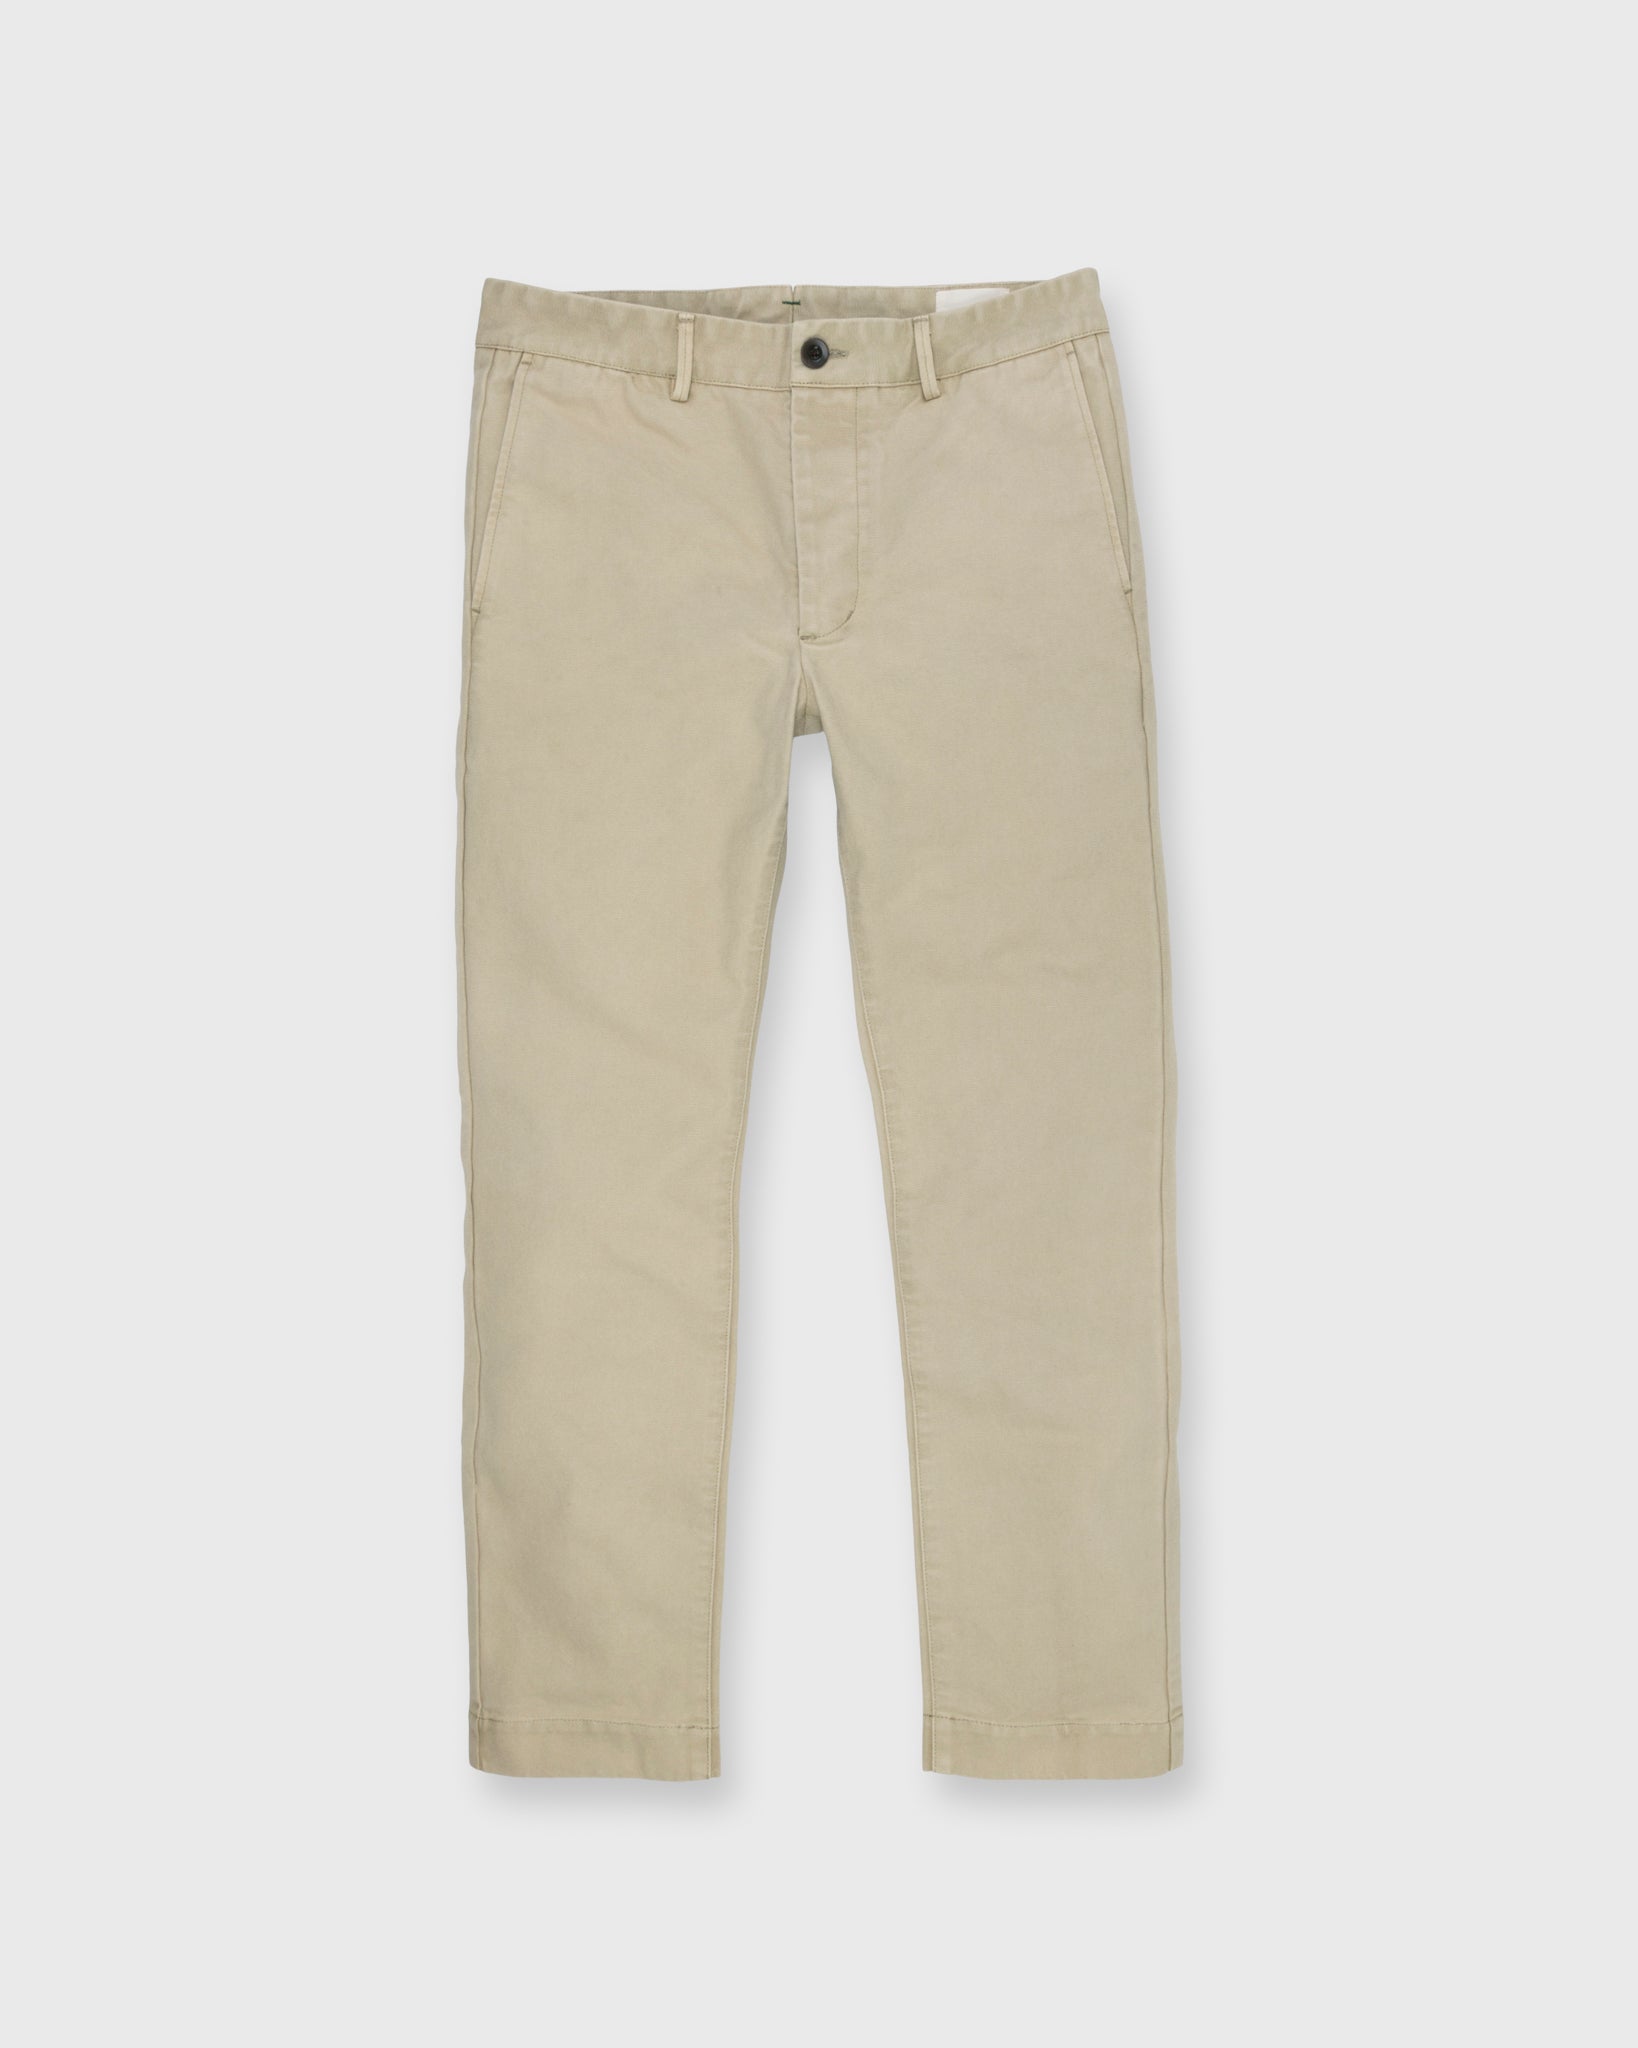 Garment-Dyed Field Pant in Vintage Khaki Canvas